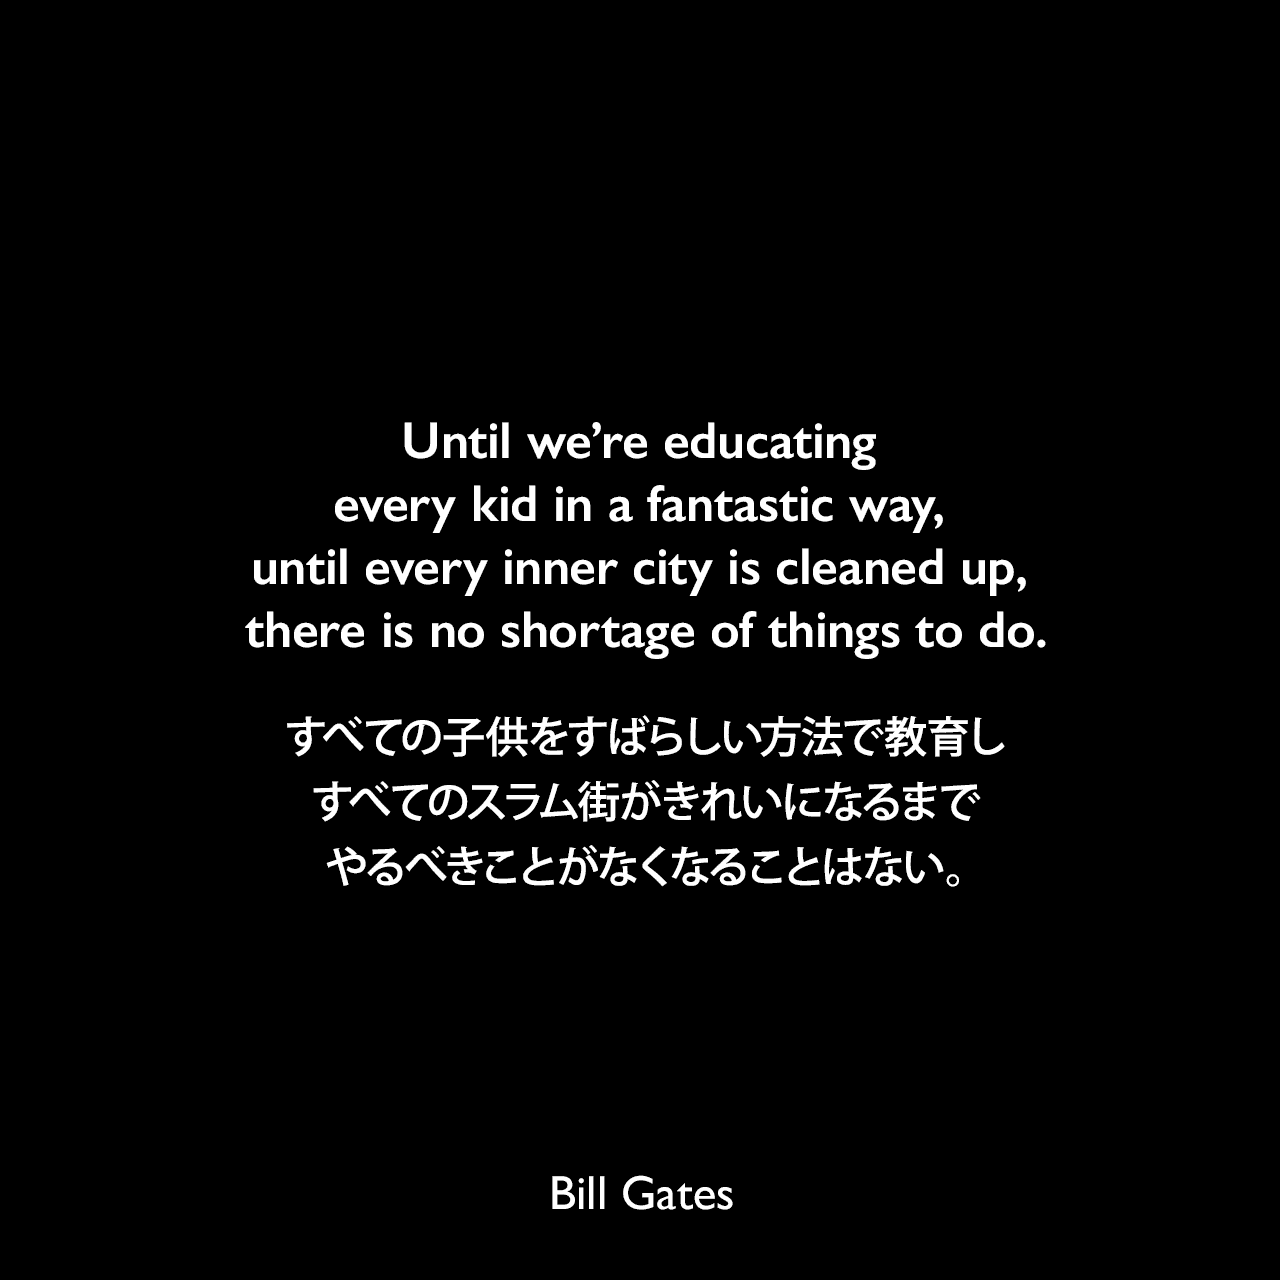 Until we’re educating every kid in a fantastic way, until every inner city is cleaned up, there is no shortage of things to do.すべての子供をすばらしい方法で教育し、すべてのスラム街がきれいになるまで、やるべきことがなくなることはない。